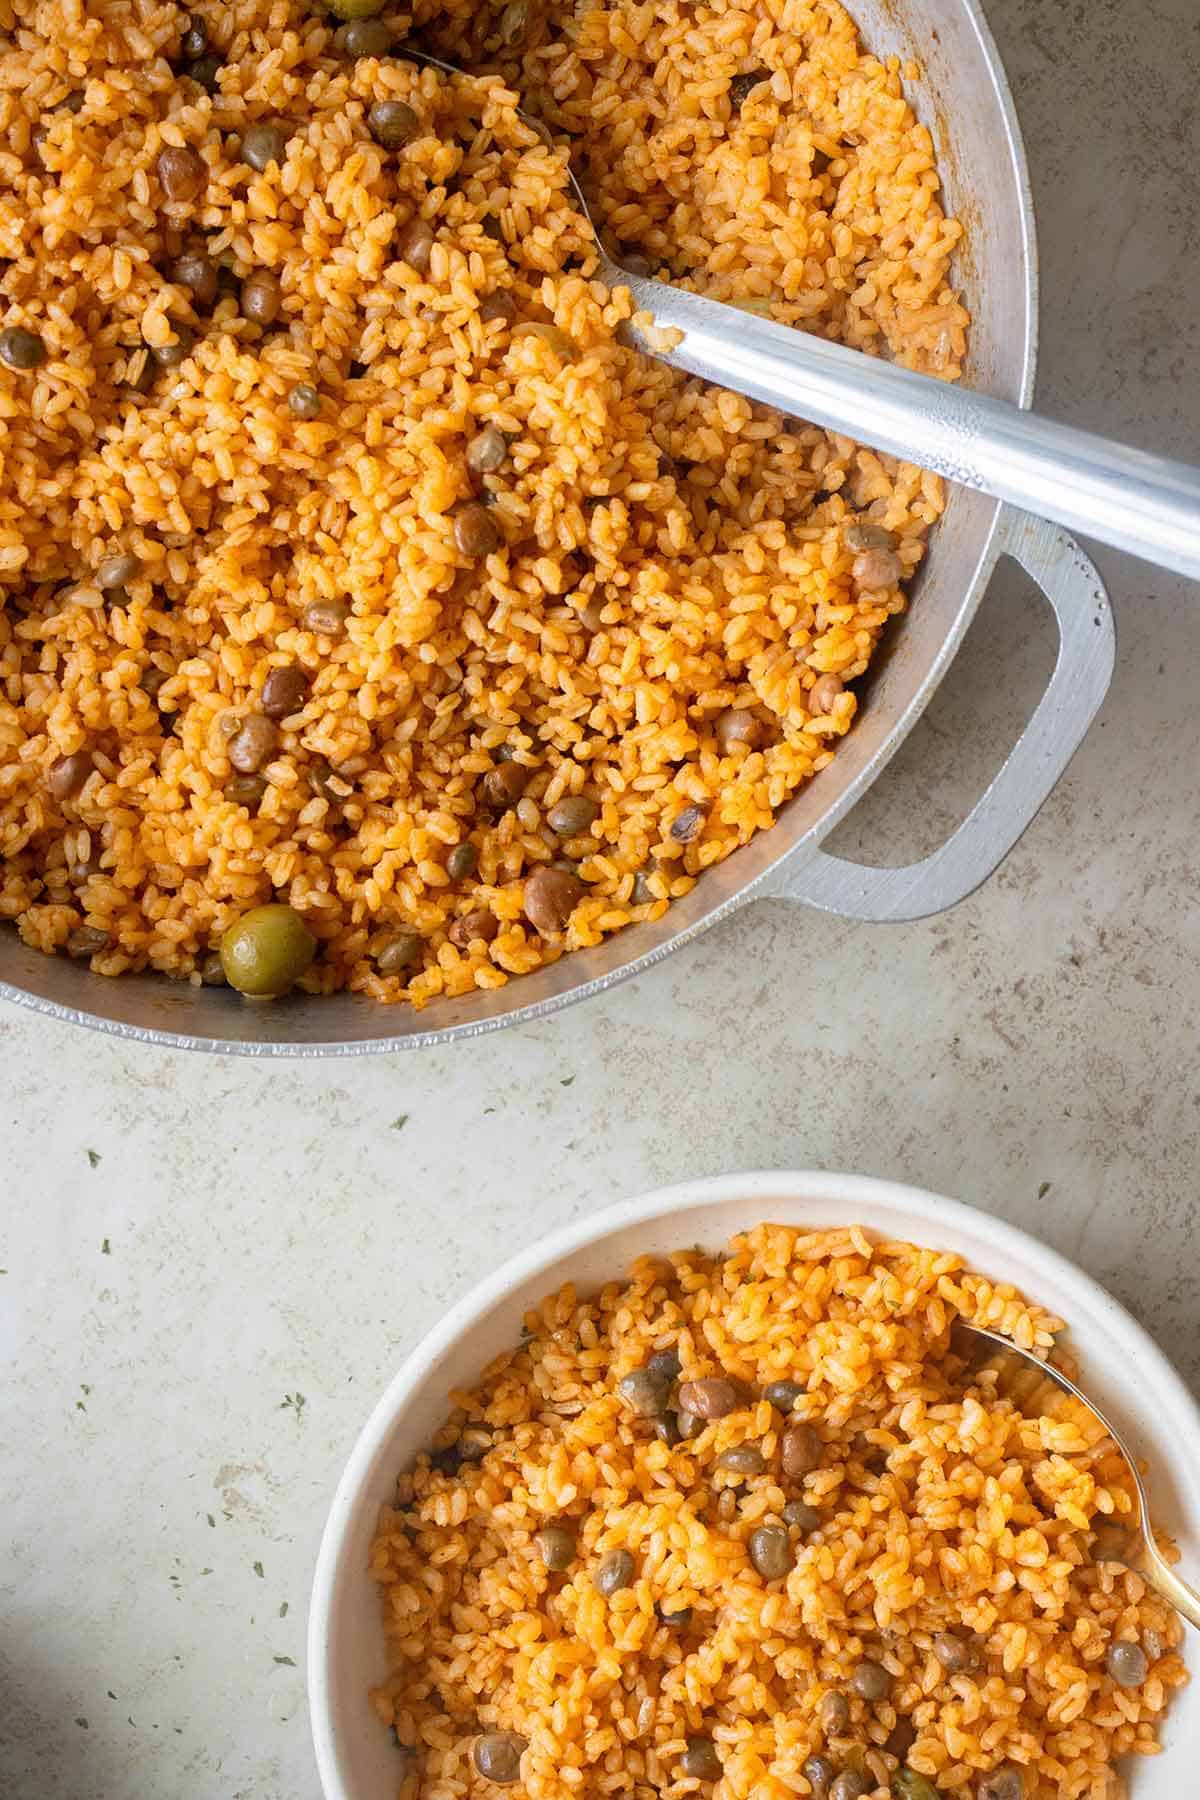 a big caldero with arroz con gandules and a plate with rice on the side.